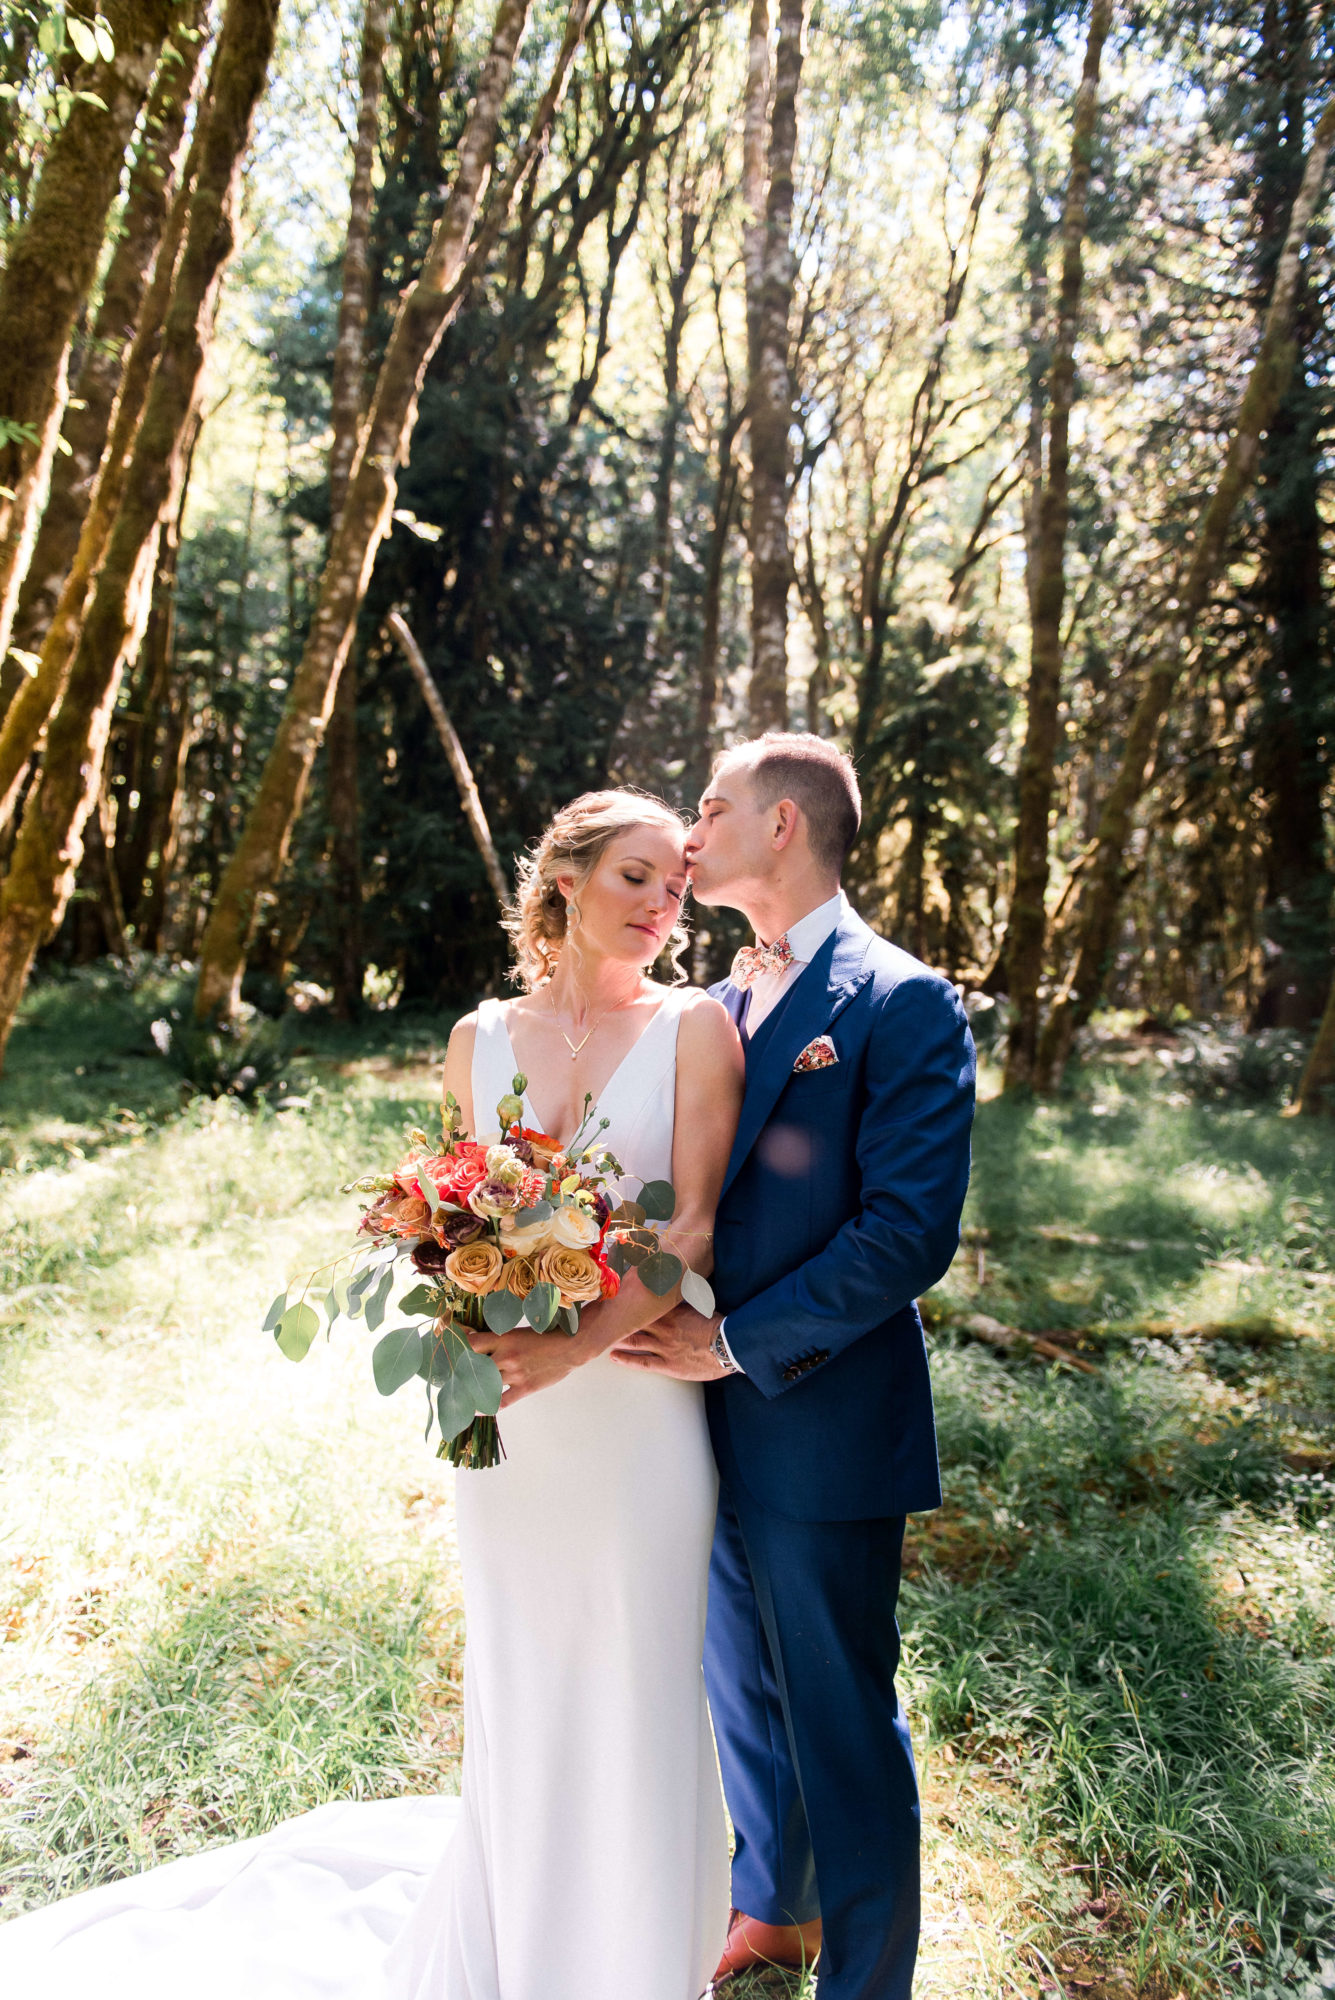 Bride and Groom in a sunny forest